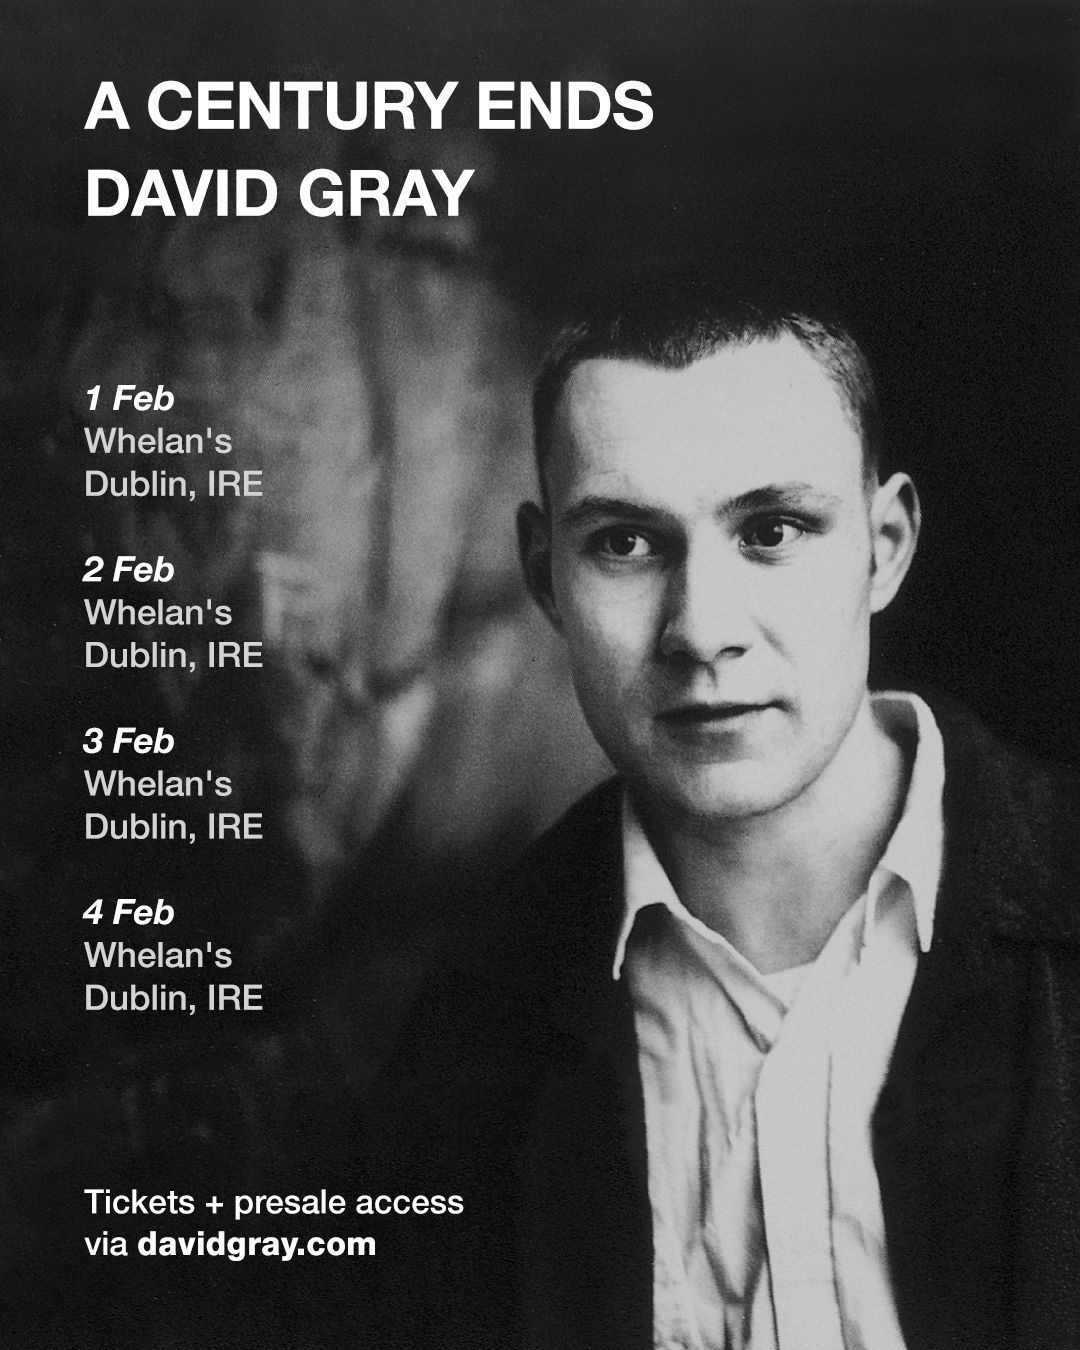 DAVID GRAY
CELEBRATES THE 30TH ANNIVERSARY OF HIS DEBUT ALBUM A CENTURY ENDS
WITH A SERIES OF SHOWS IN LONDON AND DUBLIN
